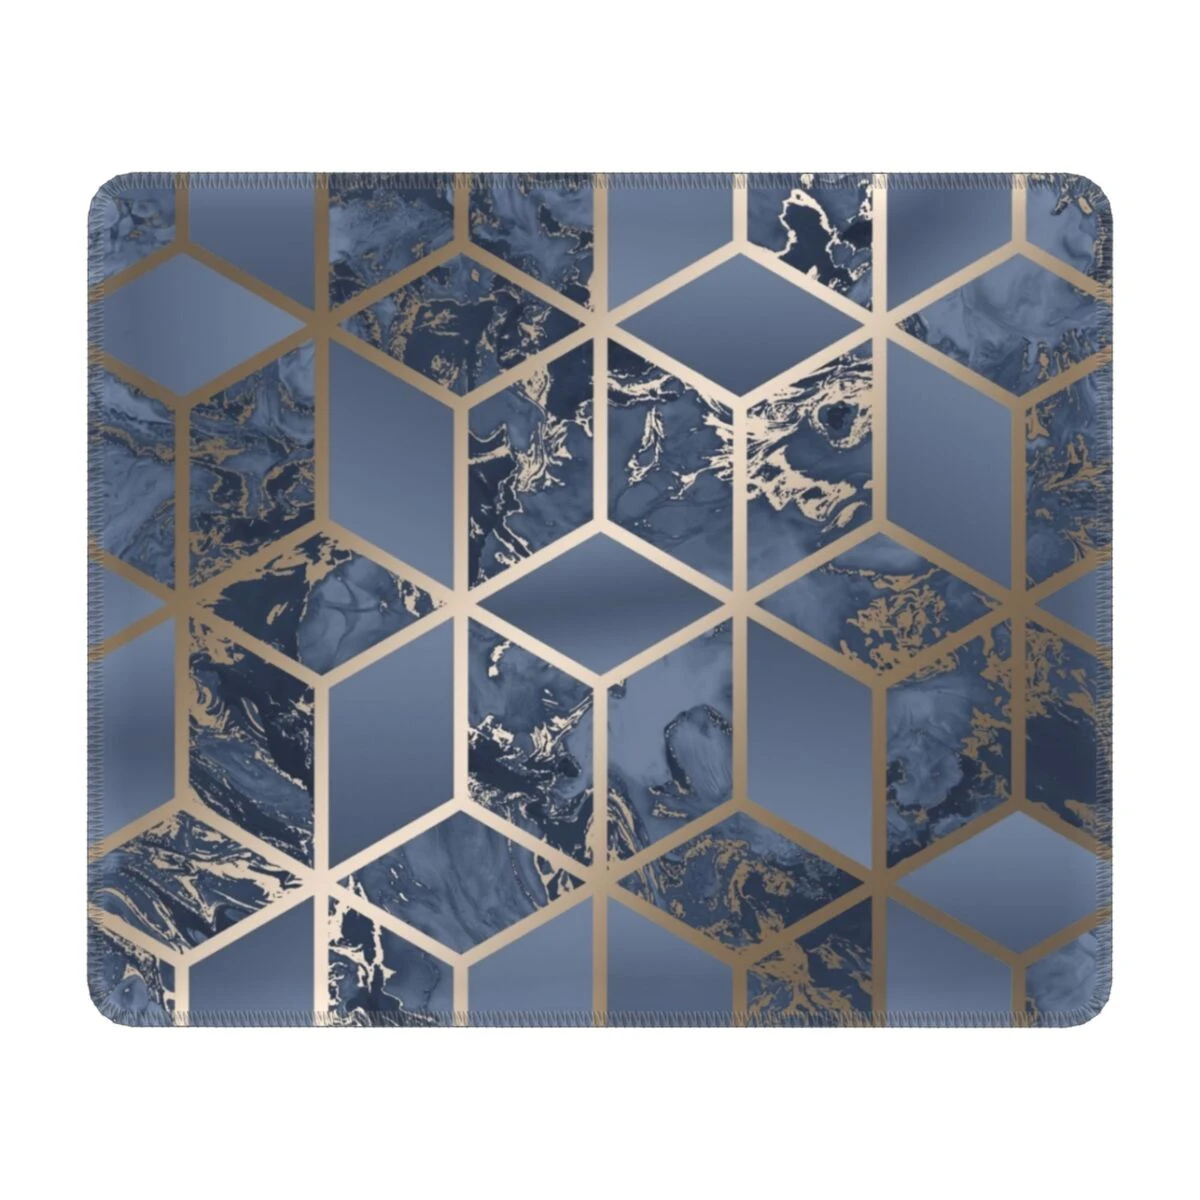 Liquid Marble Cube Texture Mouse Non Slip Rubber Gamer Mousepad Accessories Abstract Geometric Graphic Office PC Desk Mat|Mouse Pads| - AliExpress